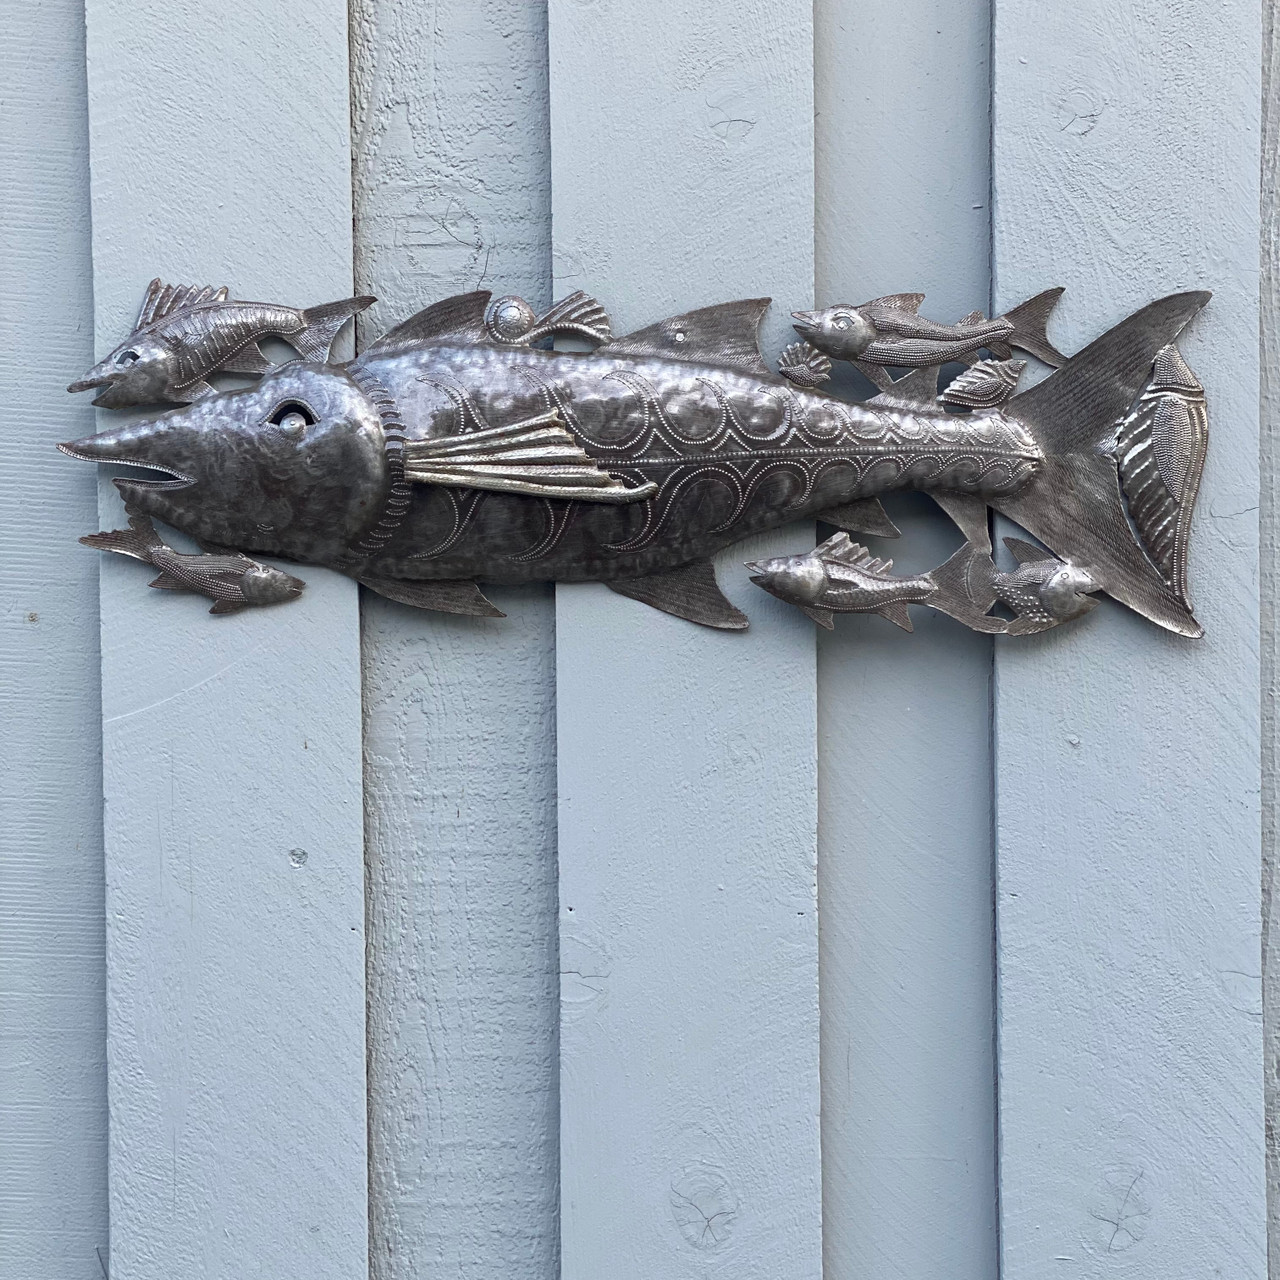 Large Fish, Metal Wall Hanging Artwork from Haiti, Sea Life Home Decorations, Haitian Art, 33.5 x 10 Inches